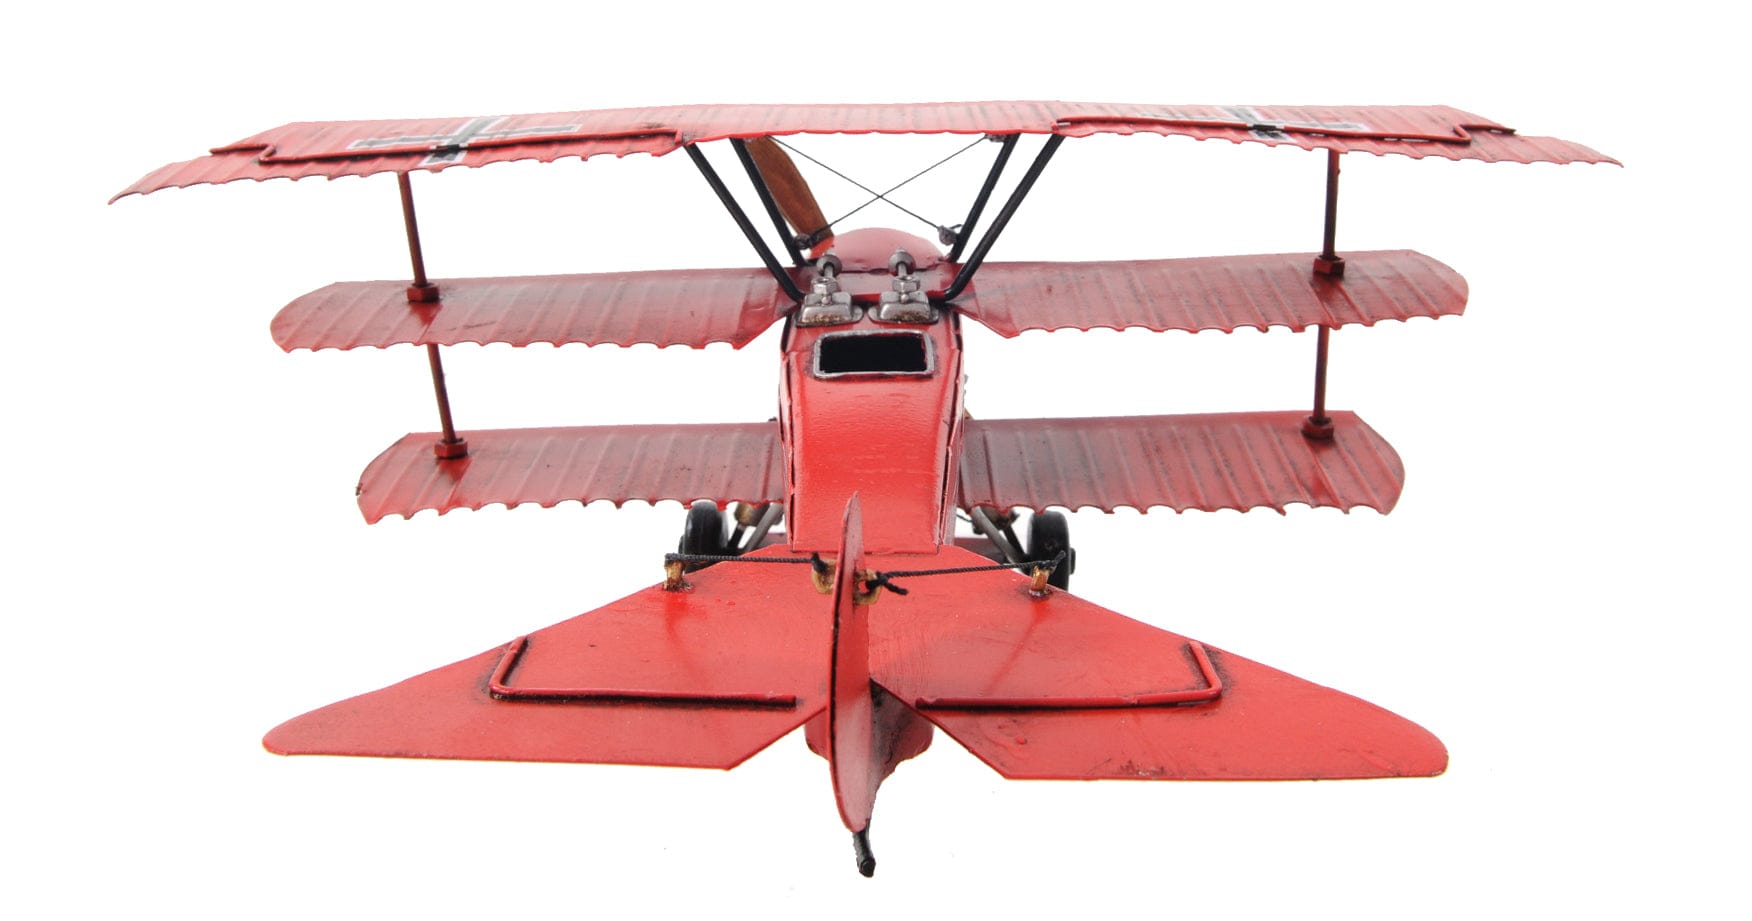 ALDO Creative Arts Collectibles Scale Model L: 12.75 W: 11.5 H: 5.5 Inches / NEW / Iron Airplane German Red Baron Fokker Triplane Fighter Deck Top Metal Model